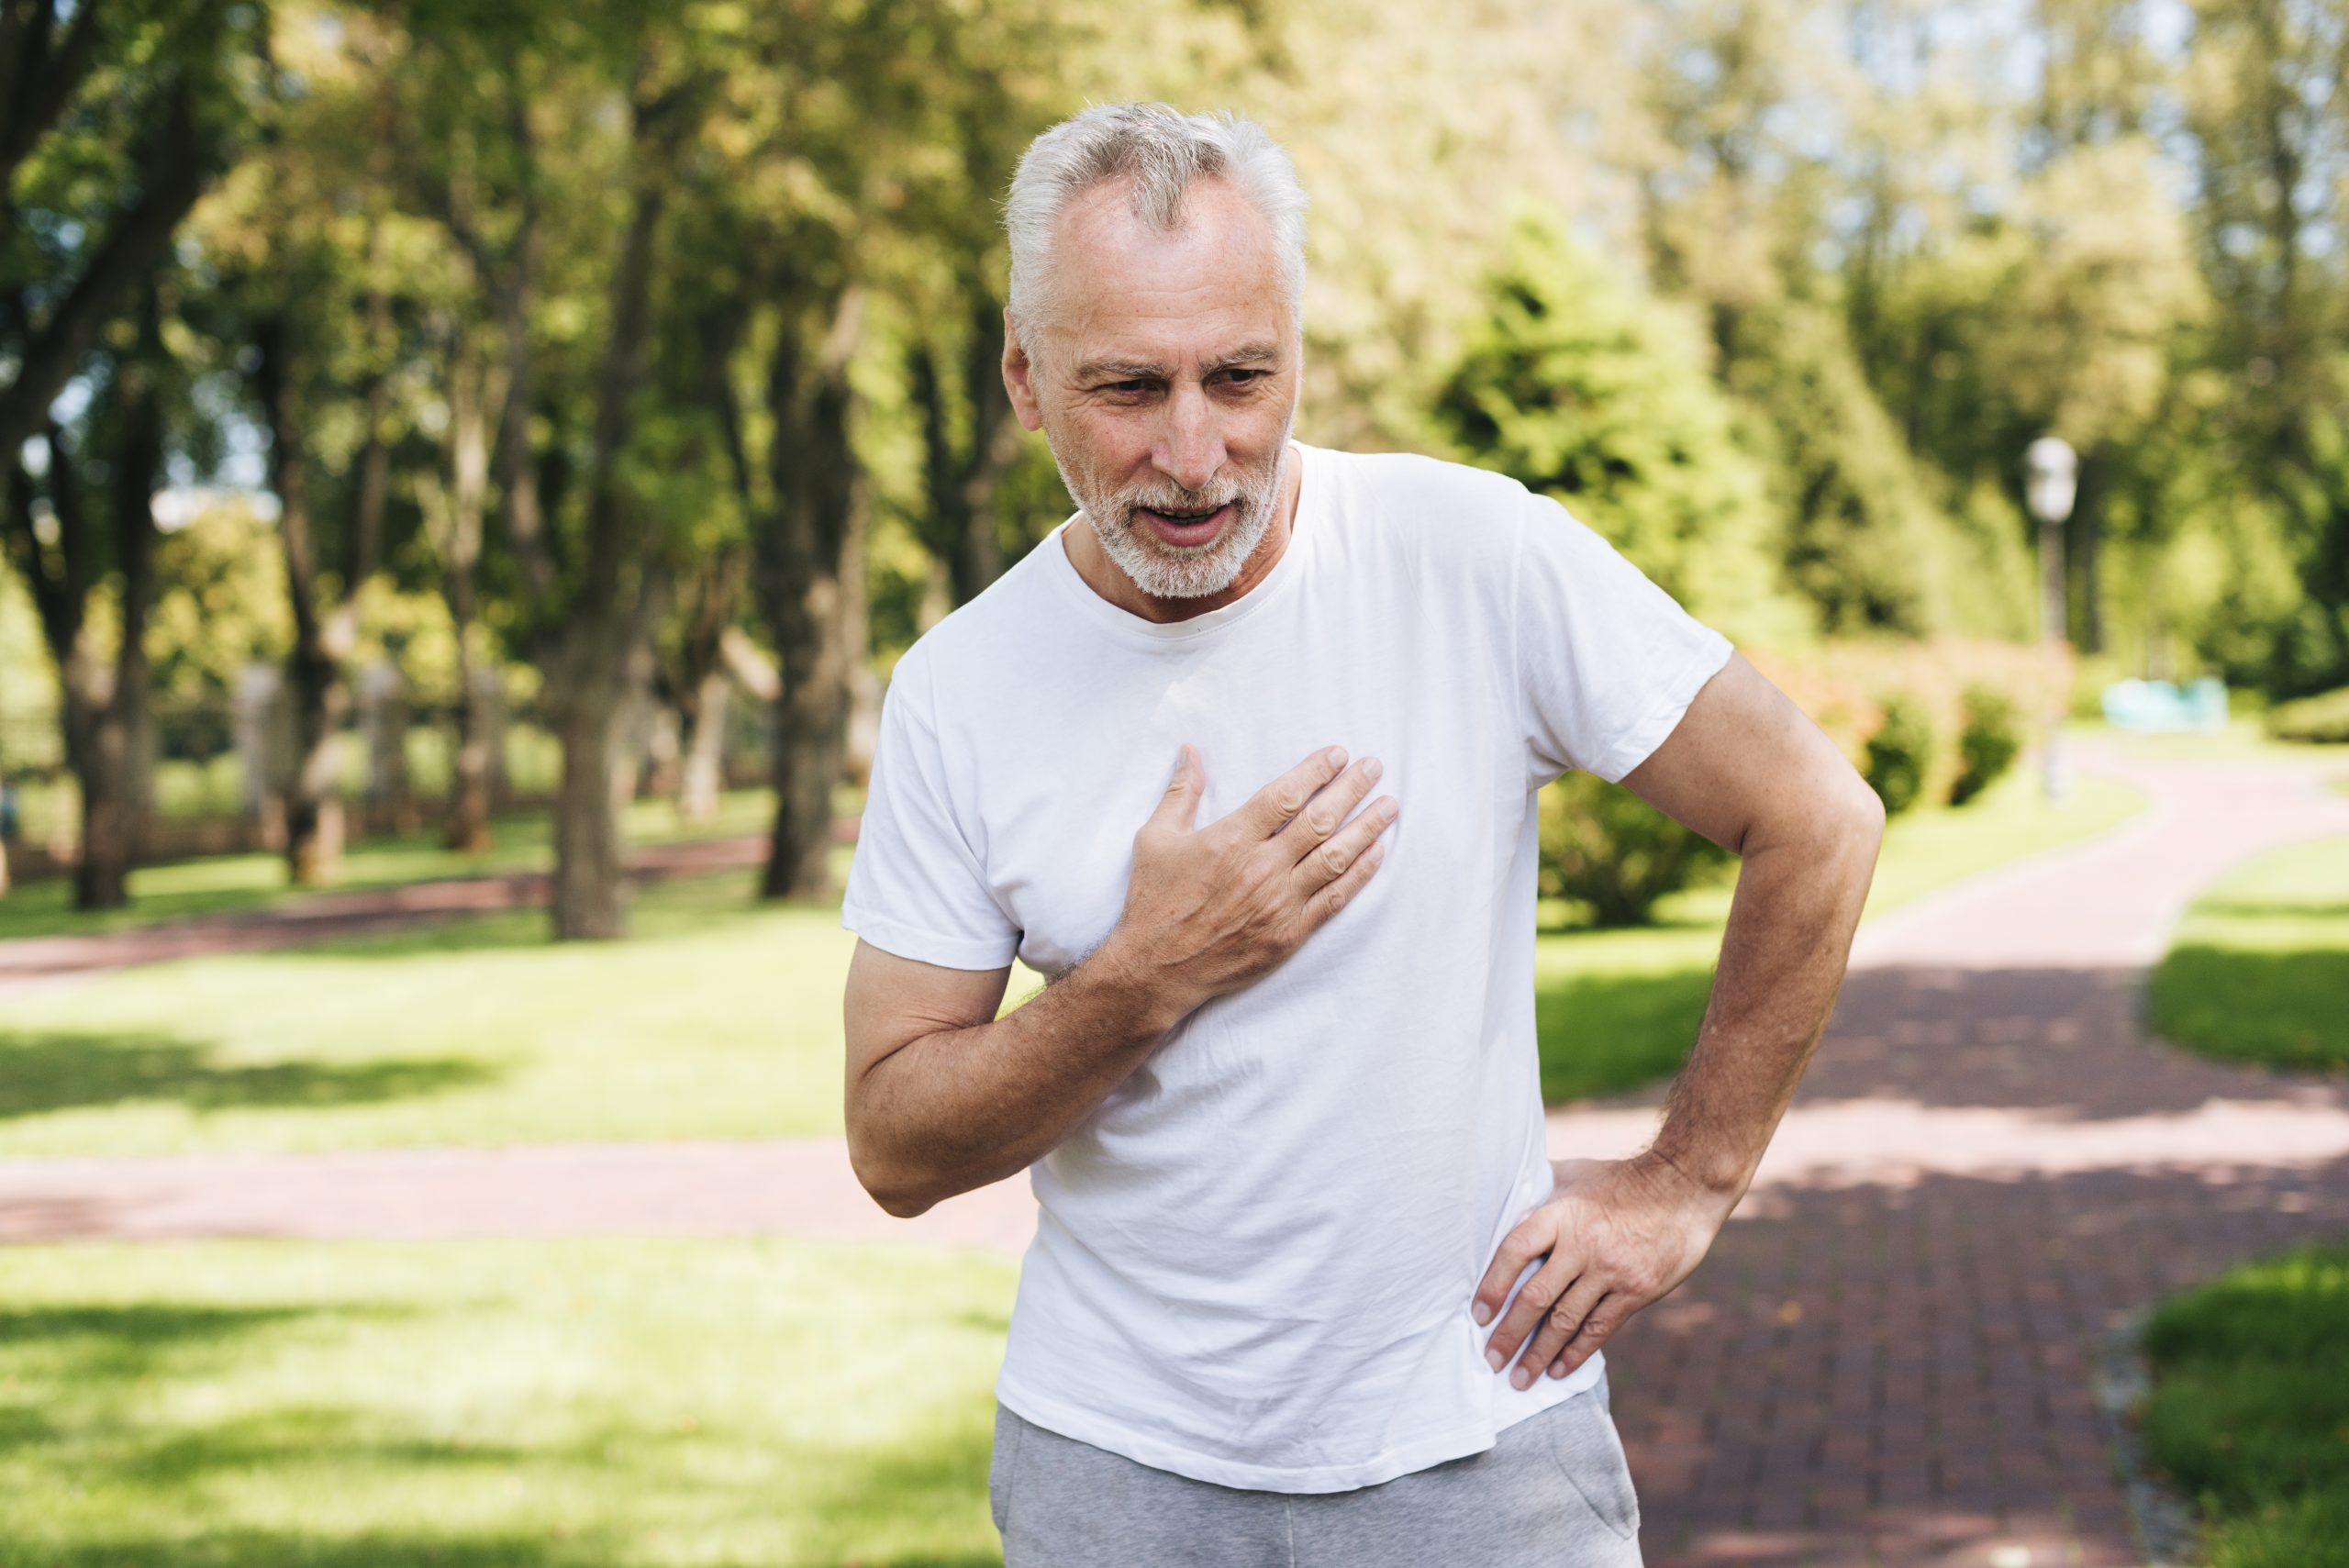 Which physical activity to choose to look after your heart? Find out how a cardiologist exercises